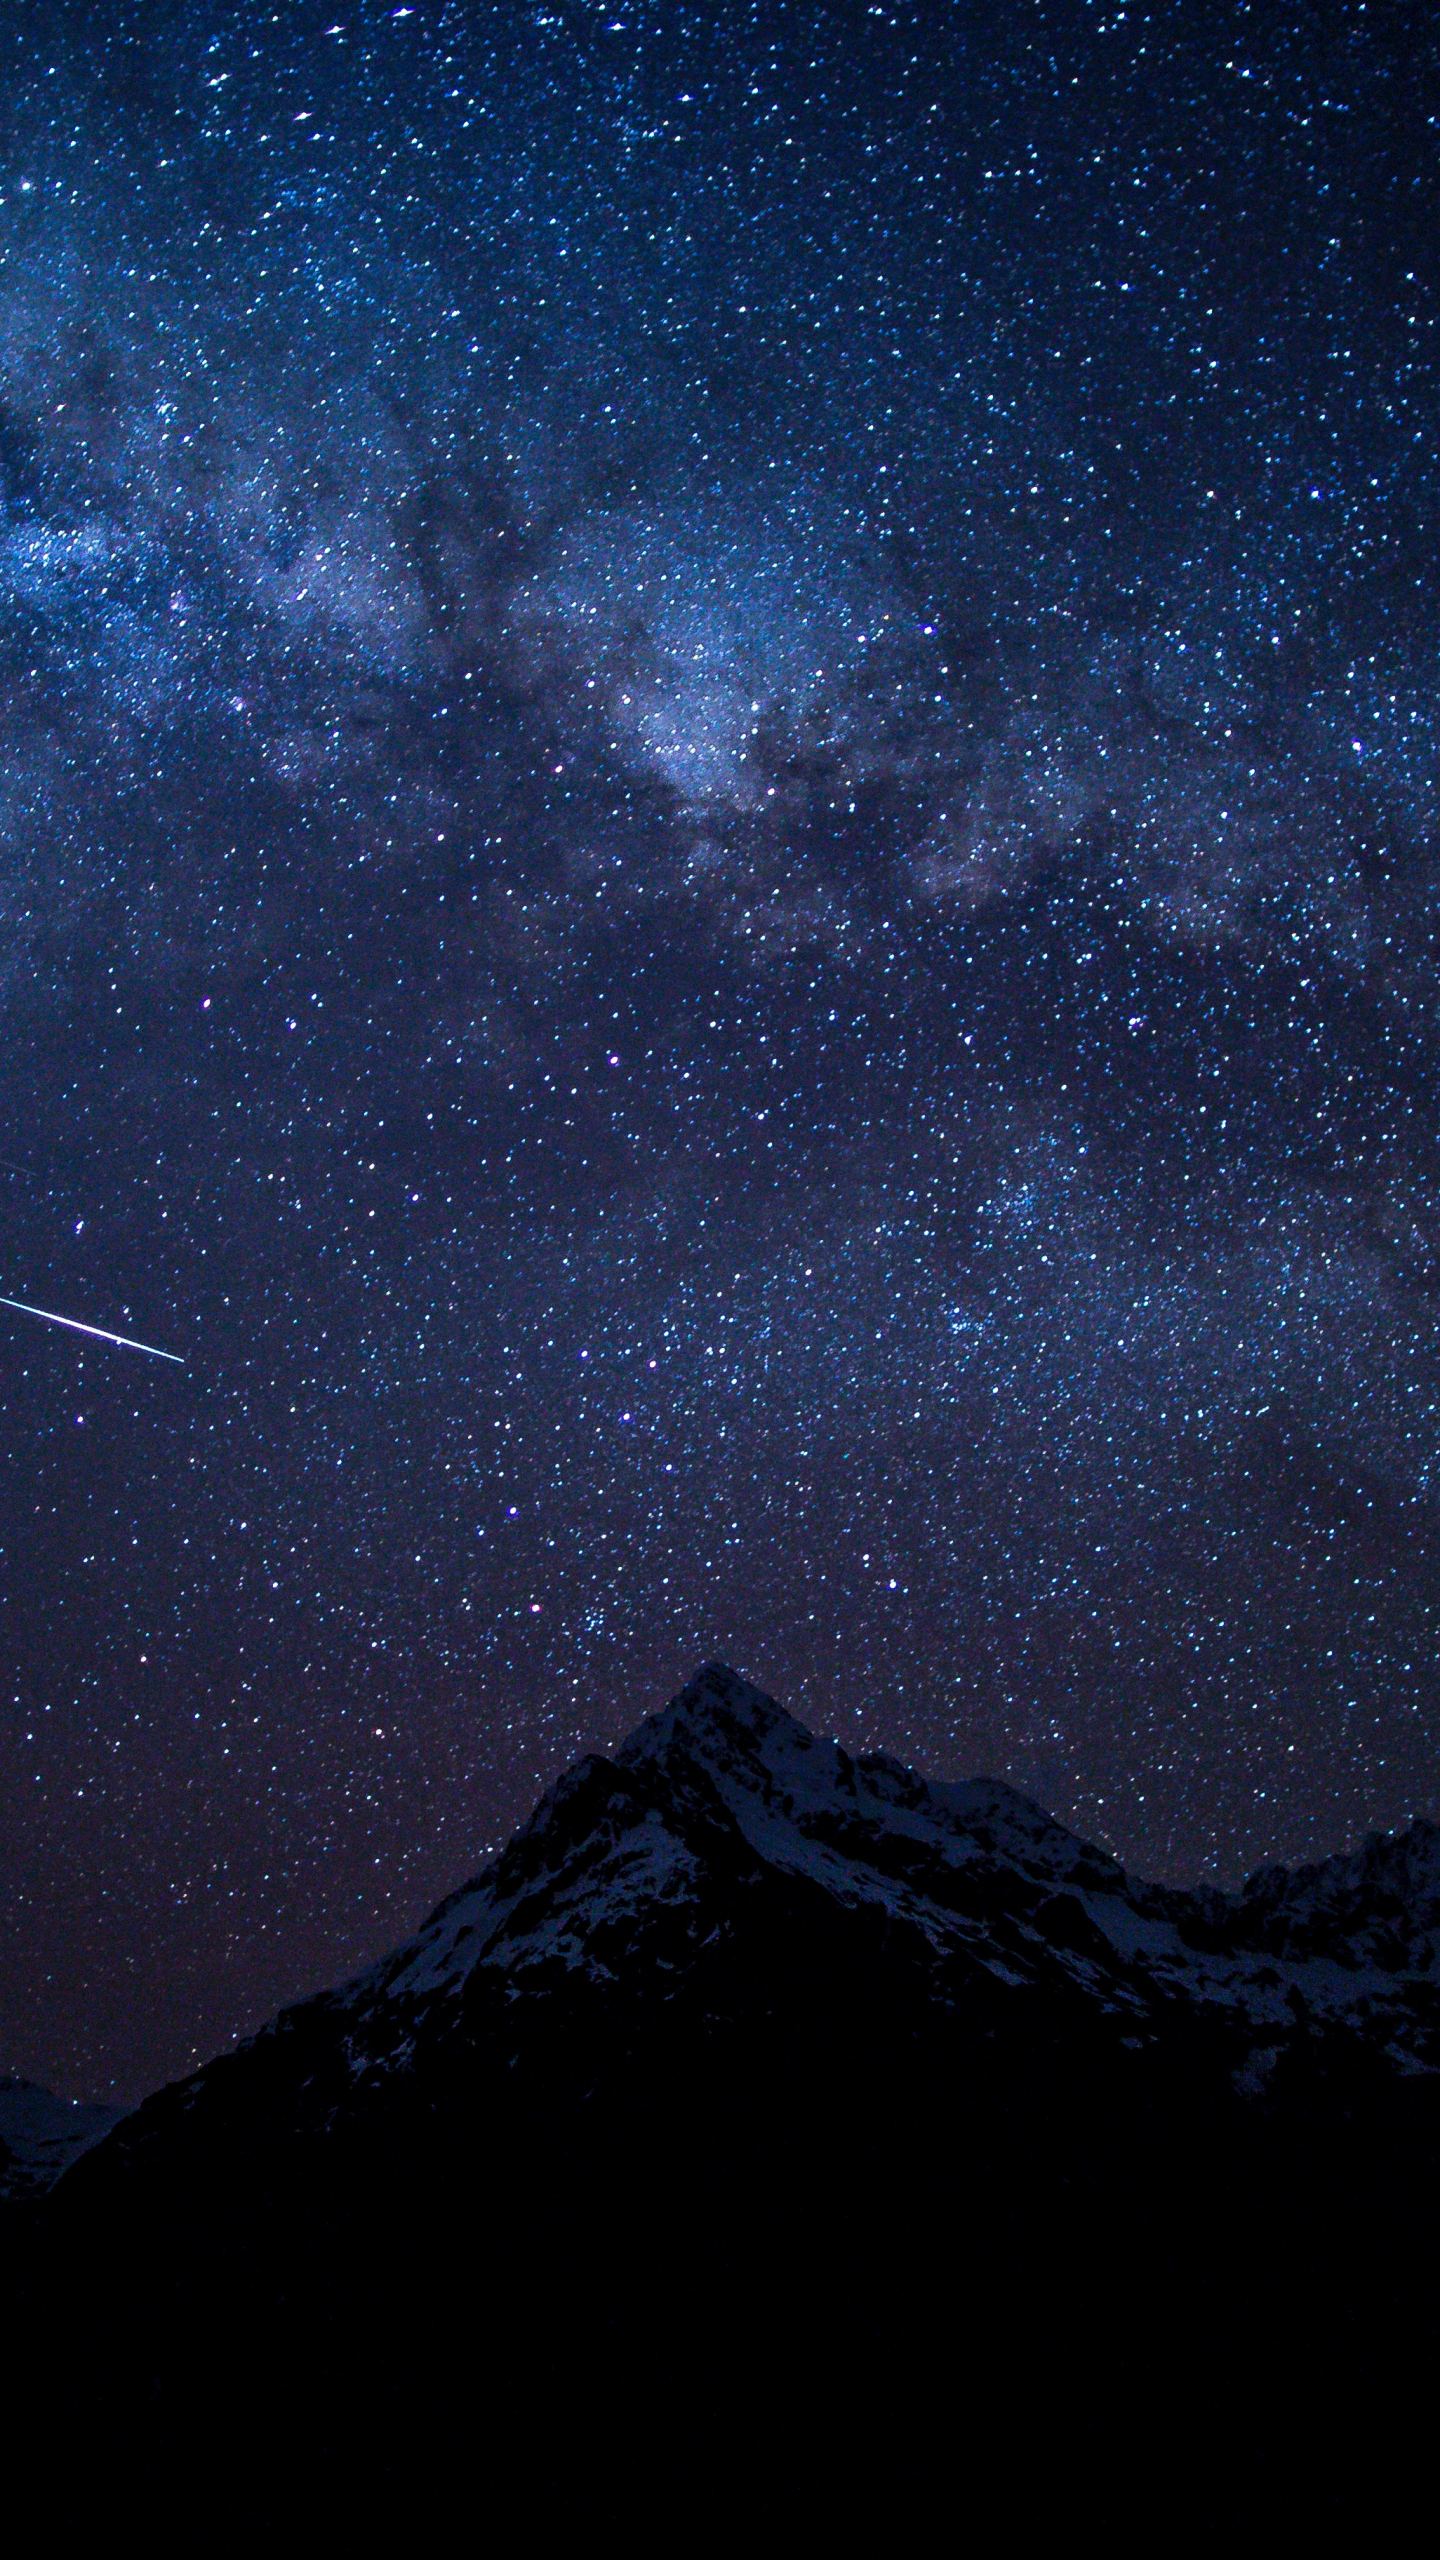 Discover the Beauty of the Sky: 100,000+ Free HD Sky Images and Backgrounds  - Pixabay